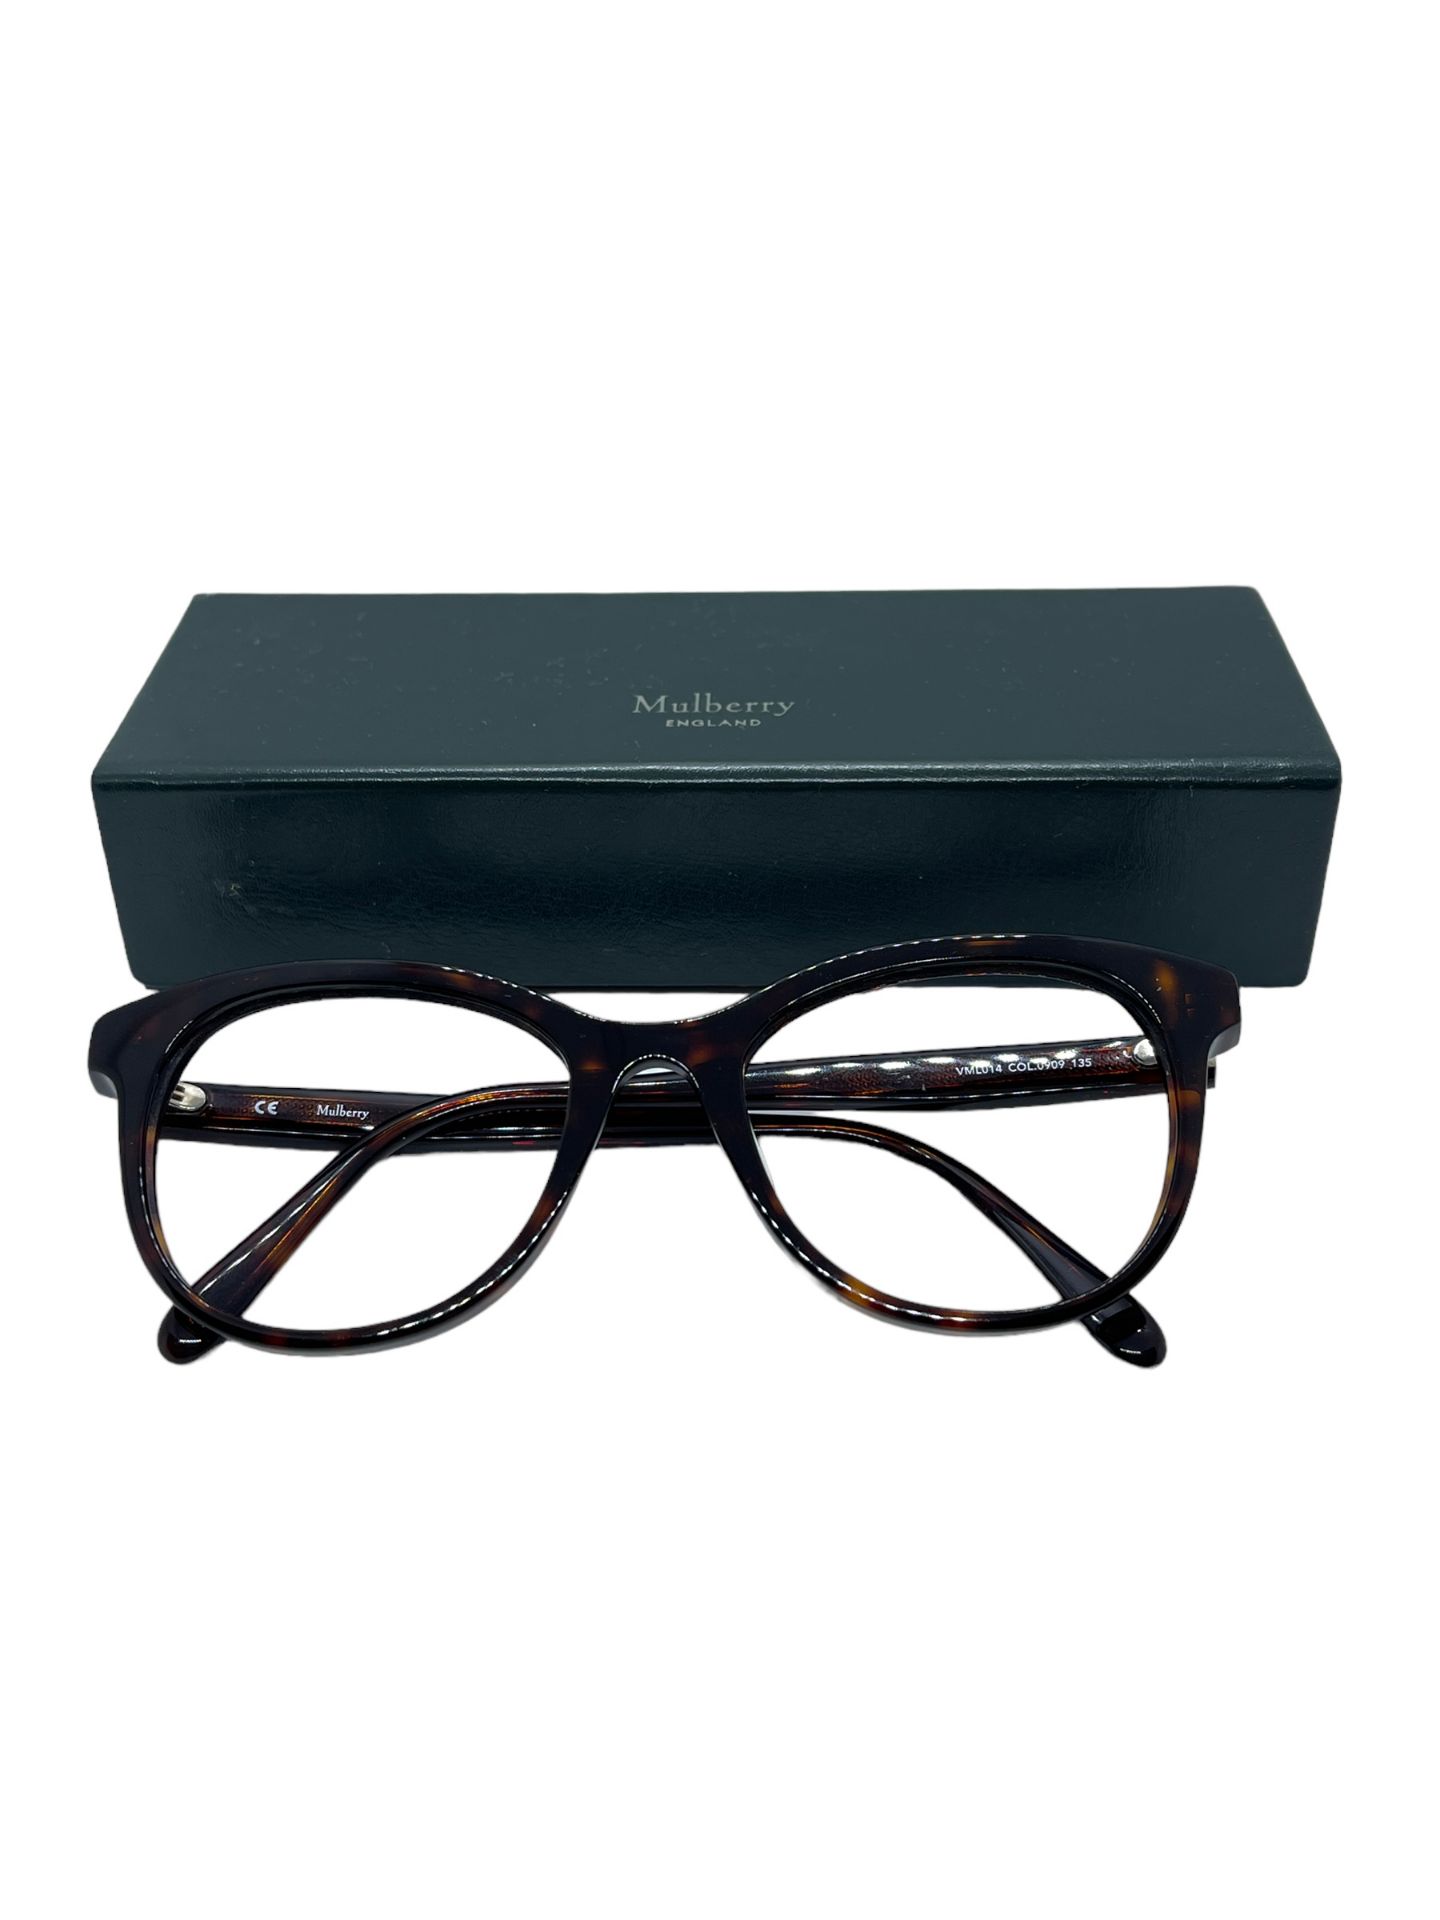 Mulberry unisex frames xdemo - Image 2 of 4